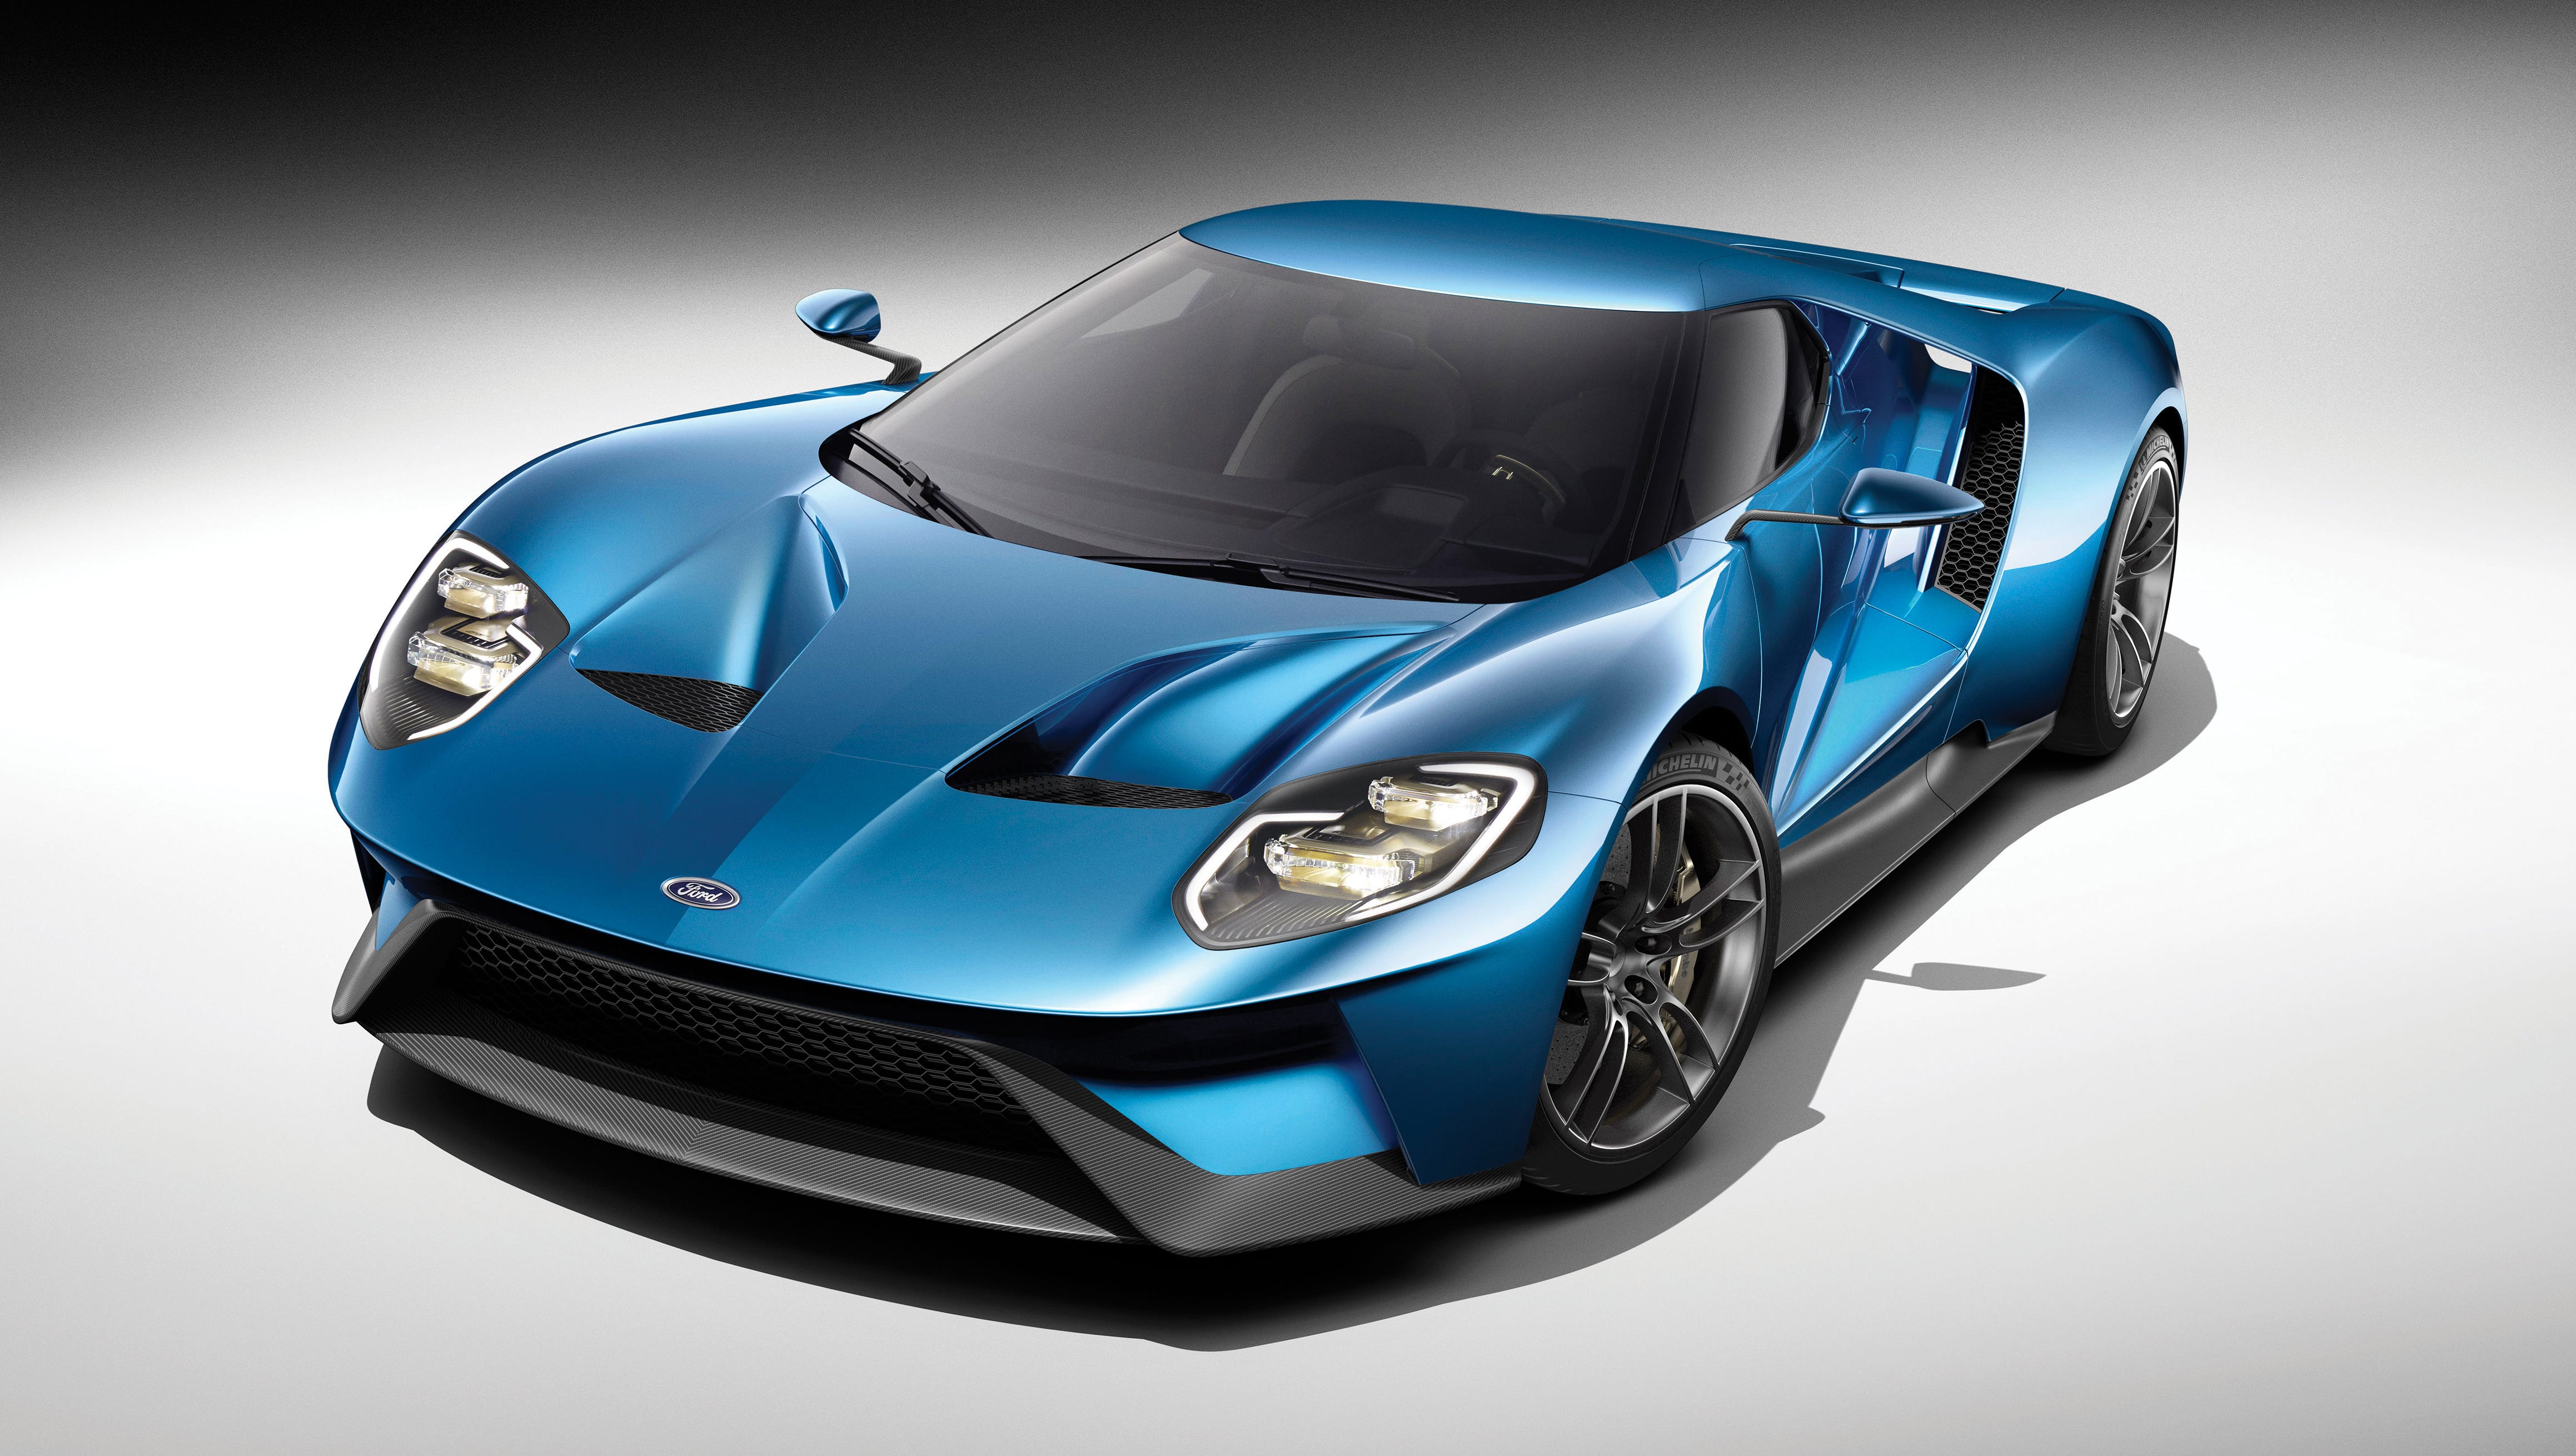 The street-version supercar is powered by a 600-horsepower 3.5-liter EcoBoost engine, which has similar architecture to engines on other Ford vehicles like the F-150.